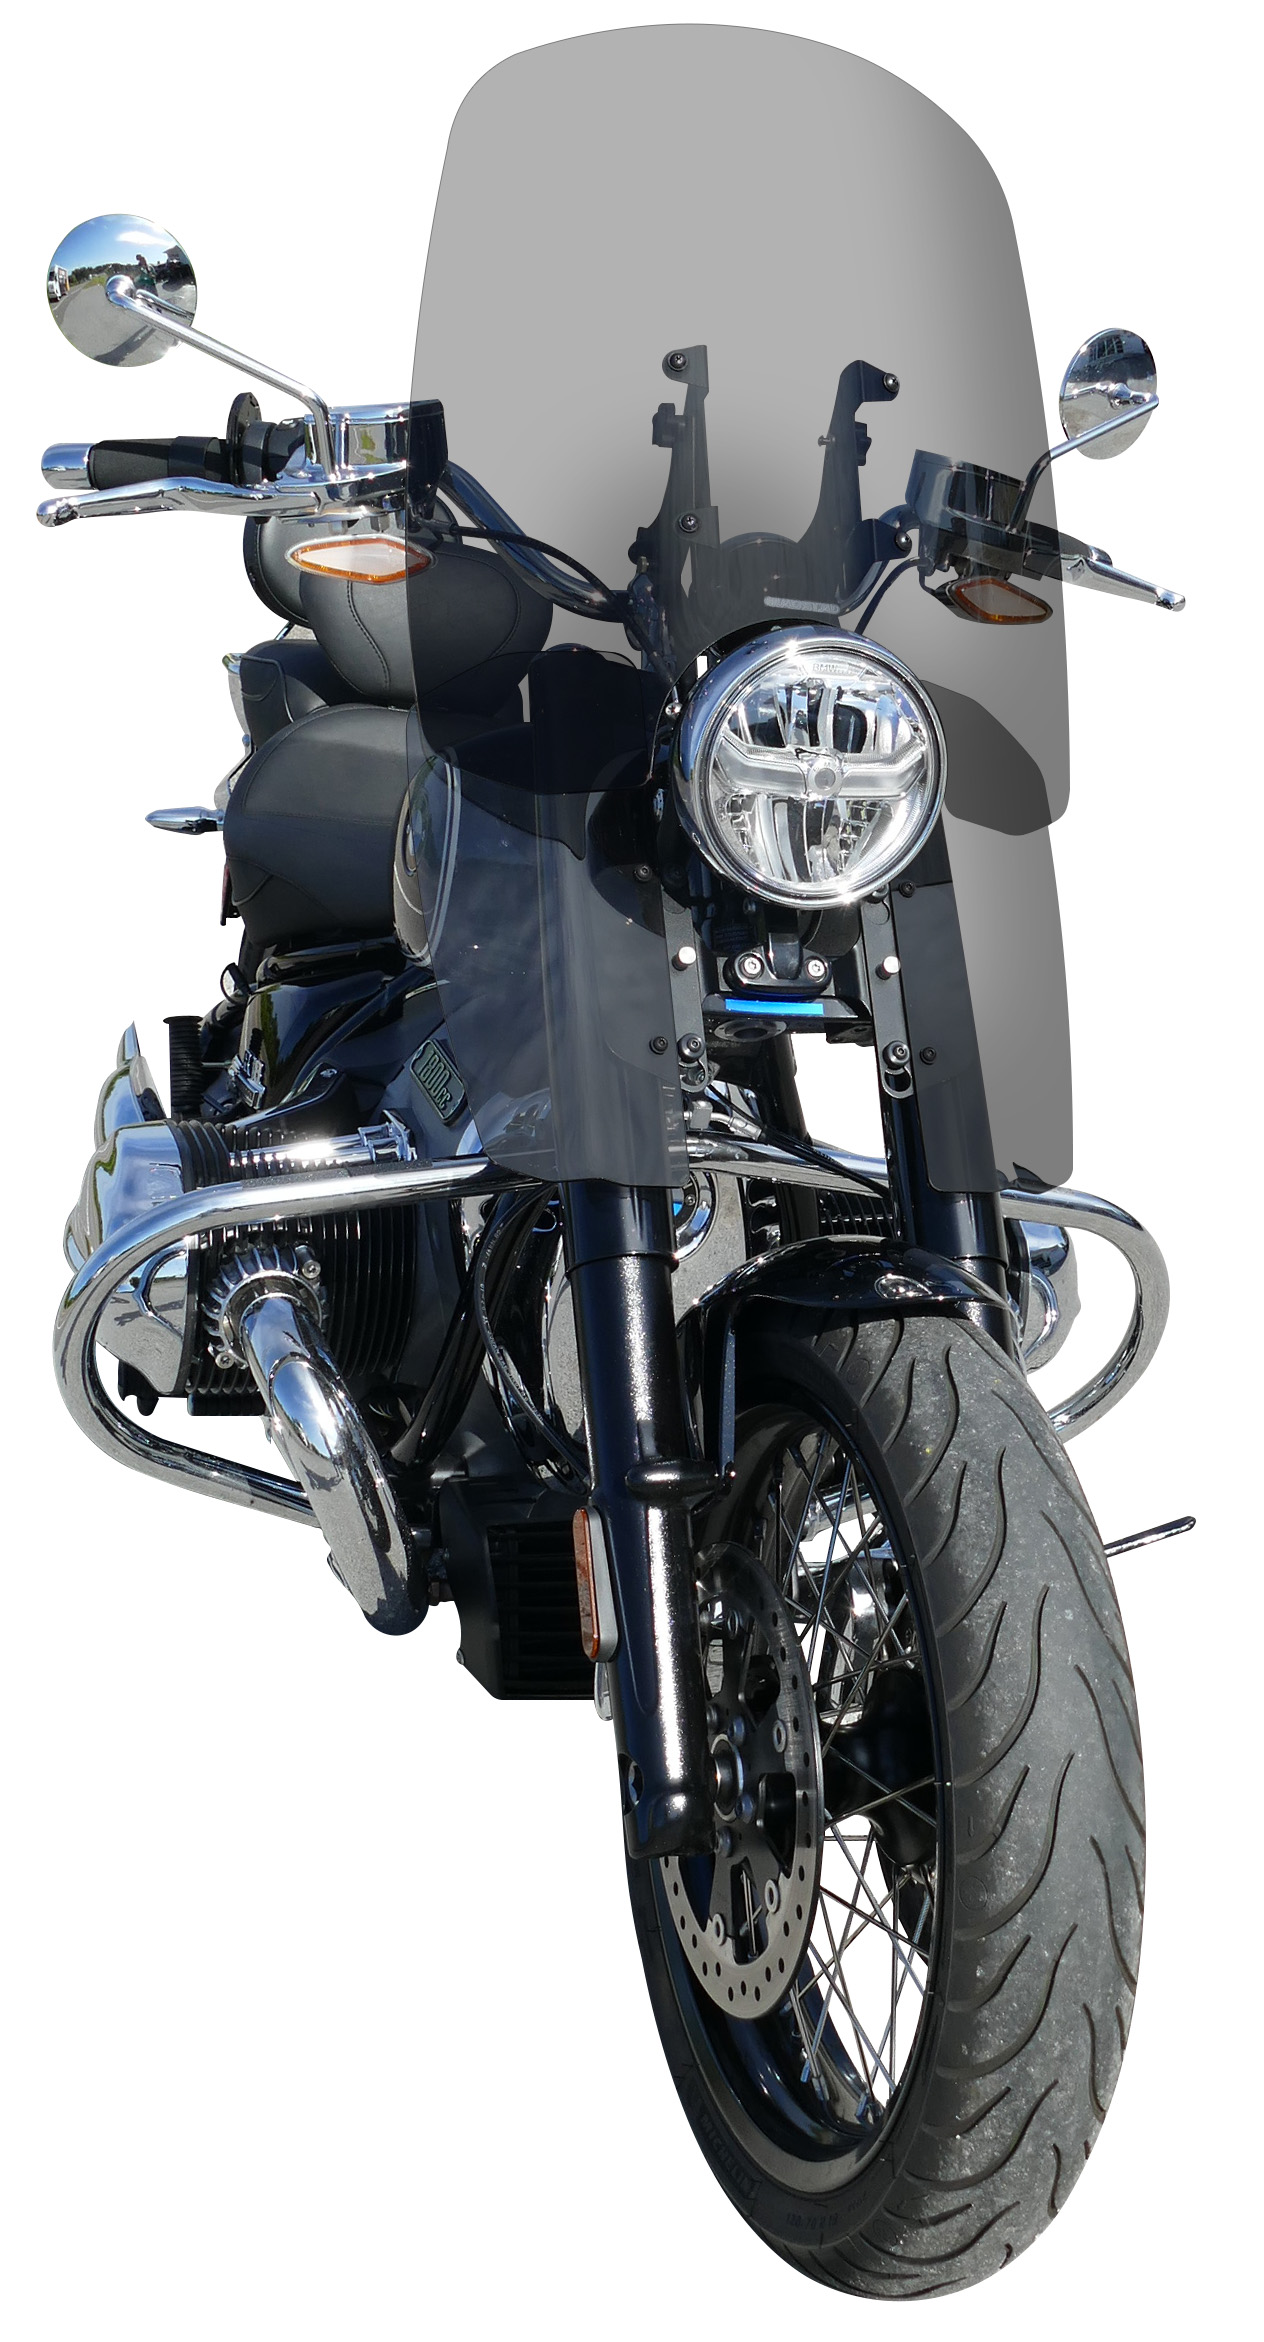 New Adjustable Motorcycle Windshield Systems from MadStad